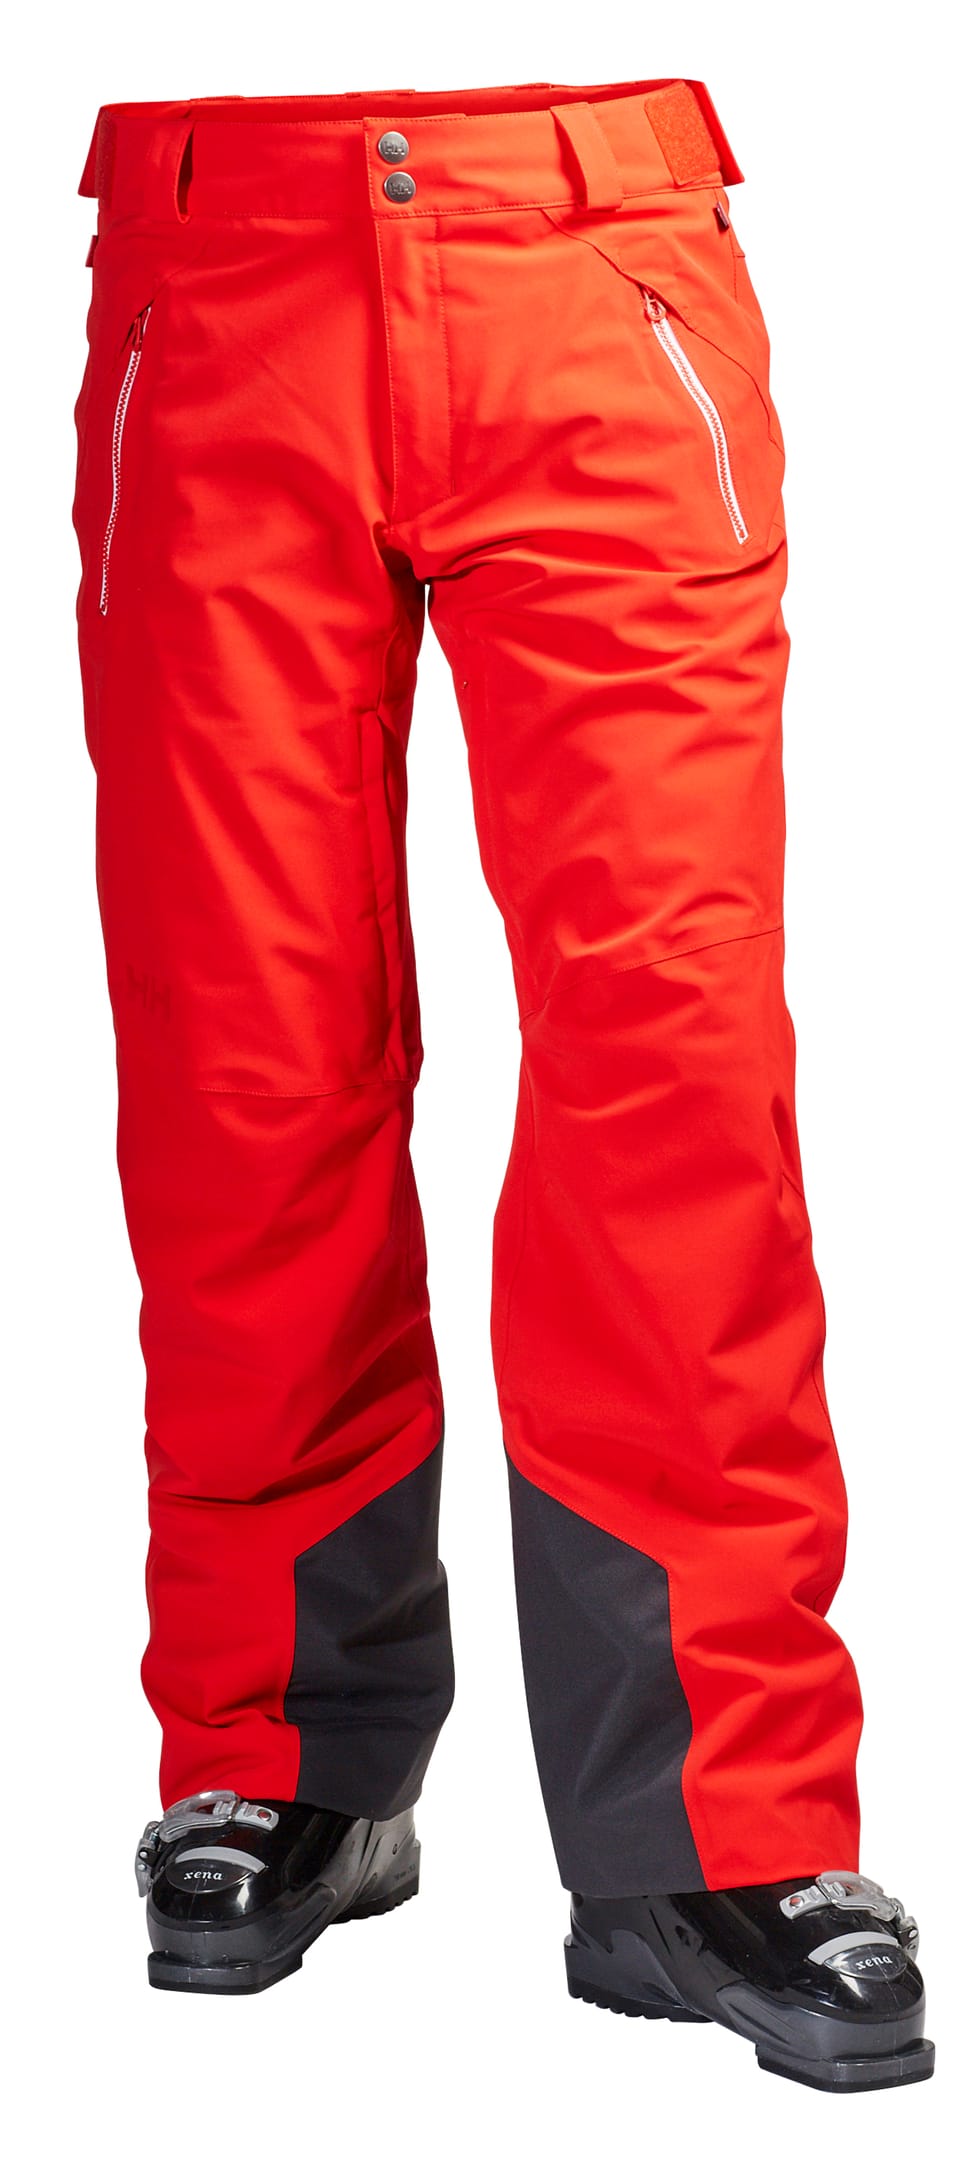 HELLY HANSEN FORCE SKI PANTS REVIEW